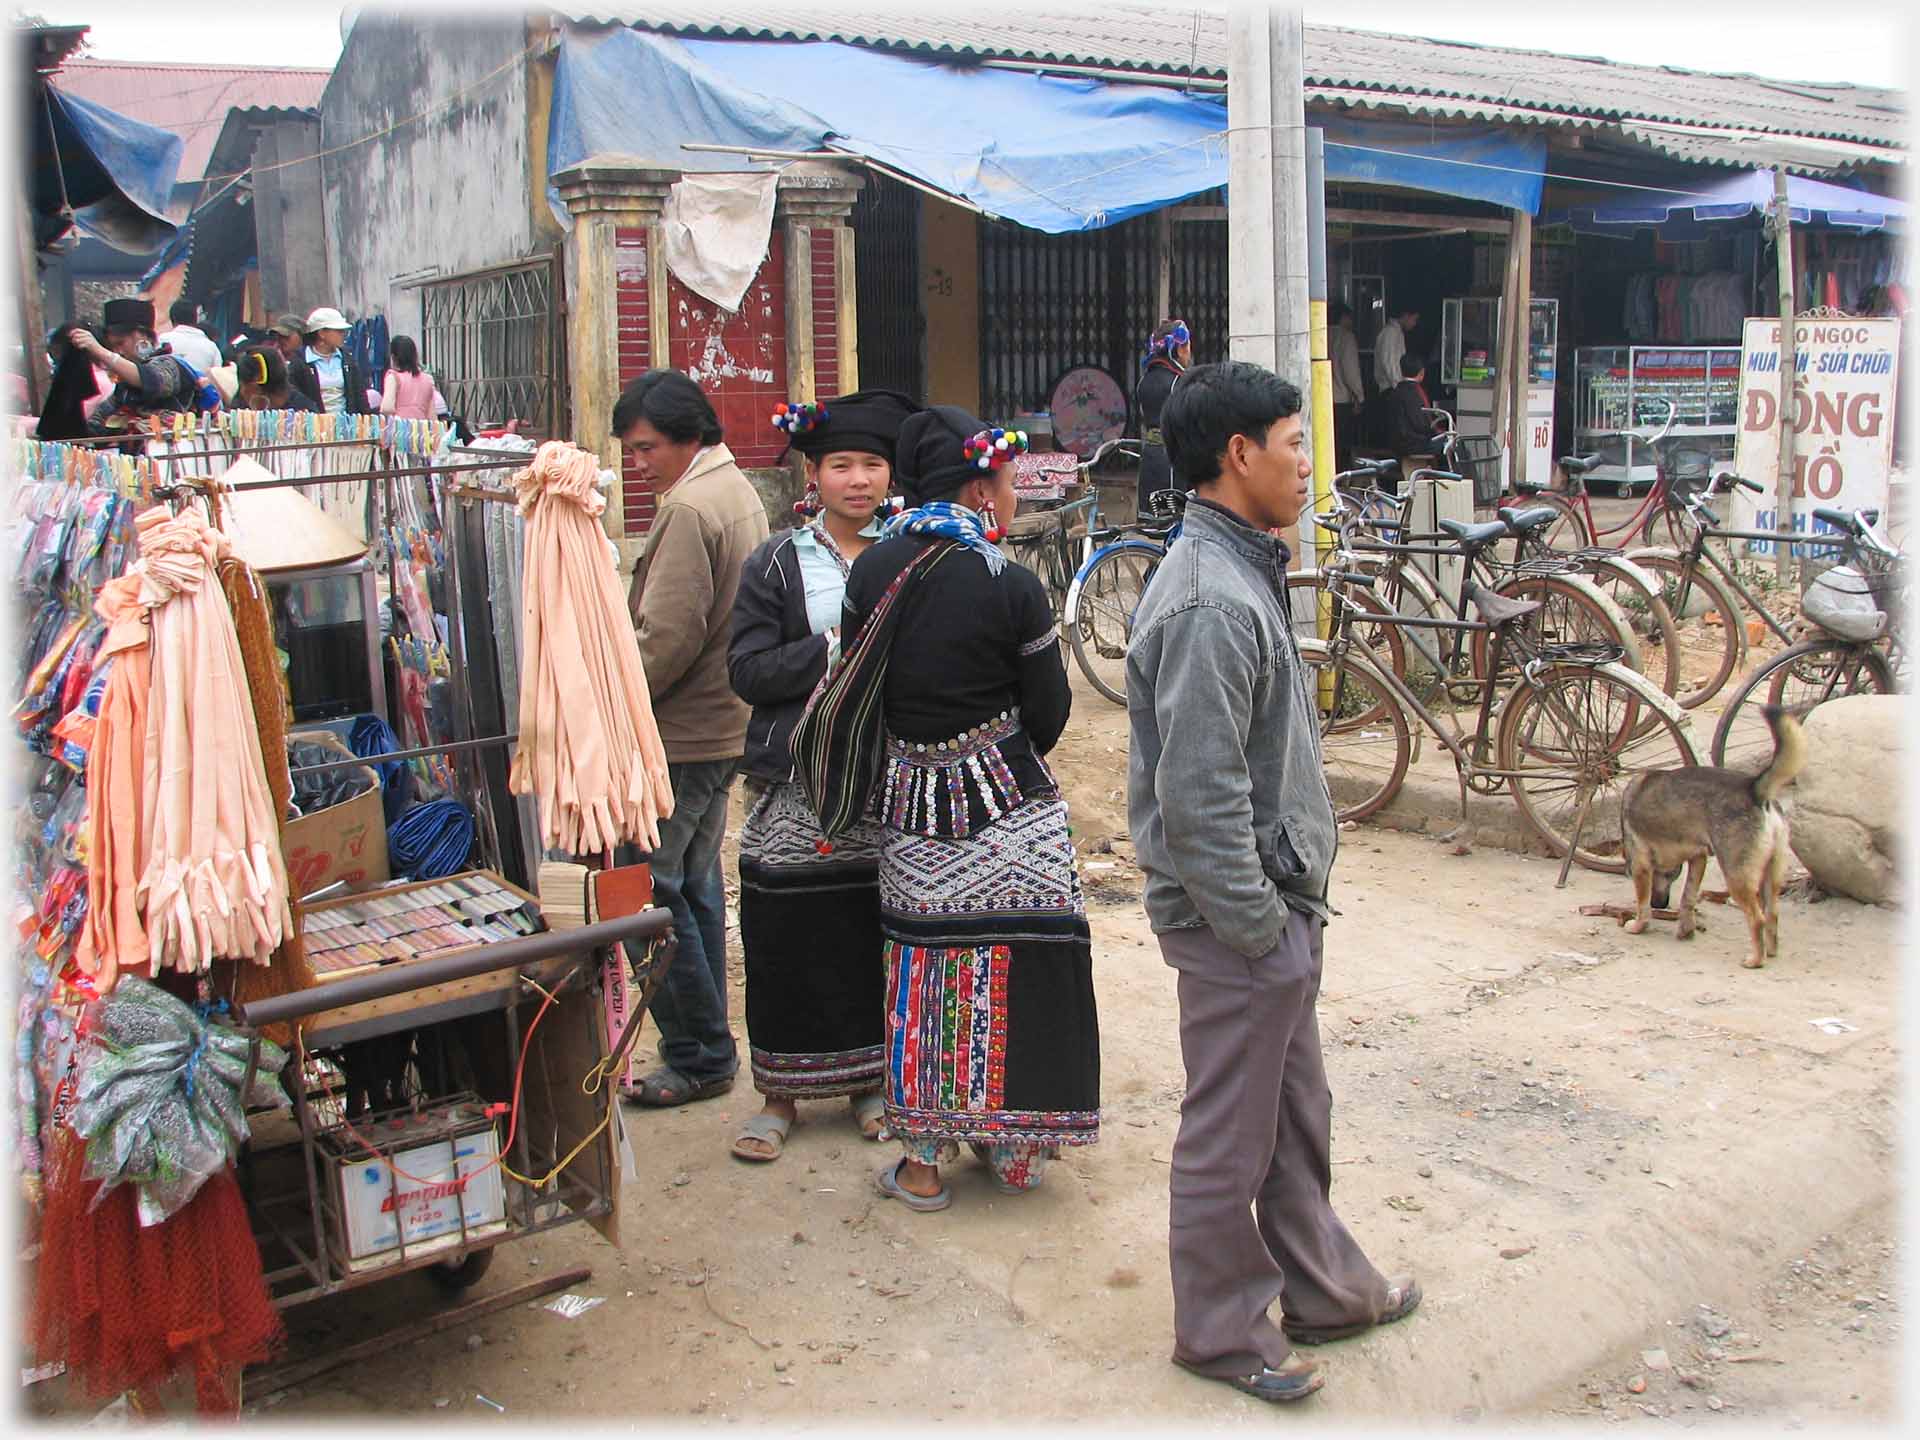 Heavily loaded hidden hand-cart, two women standing, man standing looking at range of parked bicycles.